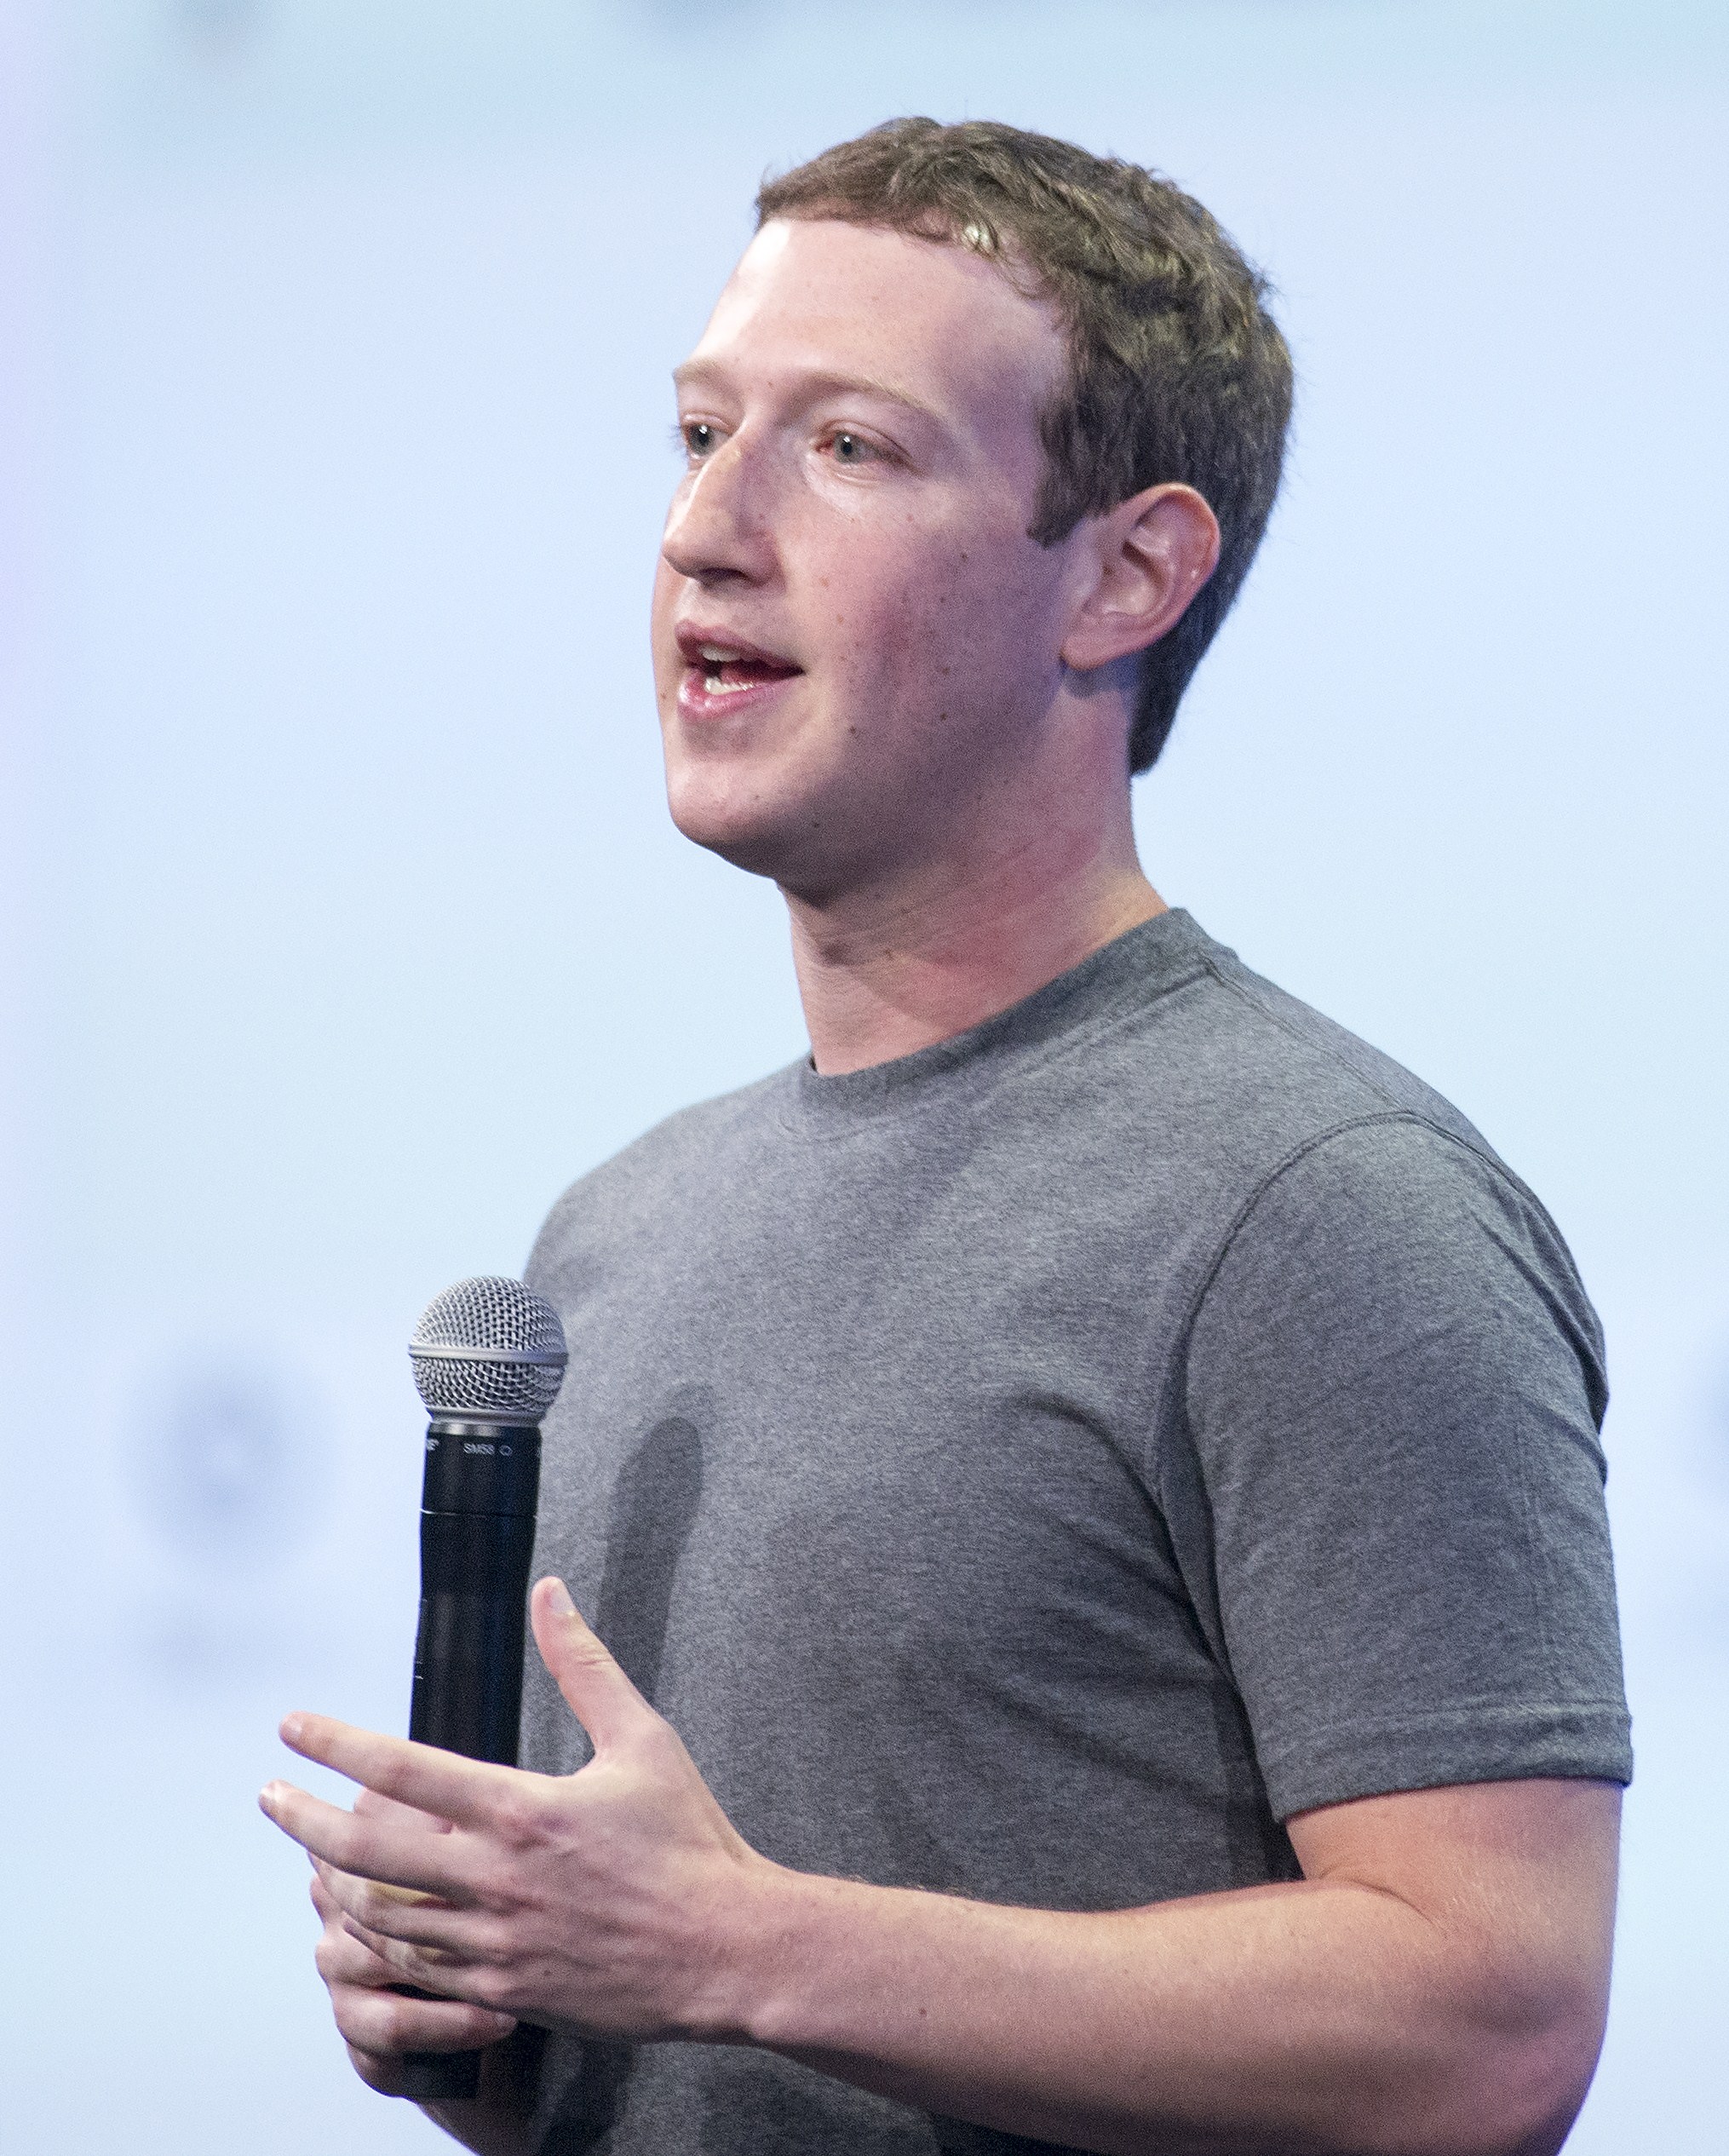 Mark Zuckerberg at the F8 summit in San Francisco on March 25, 2015.